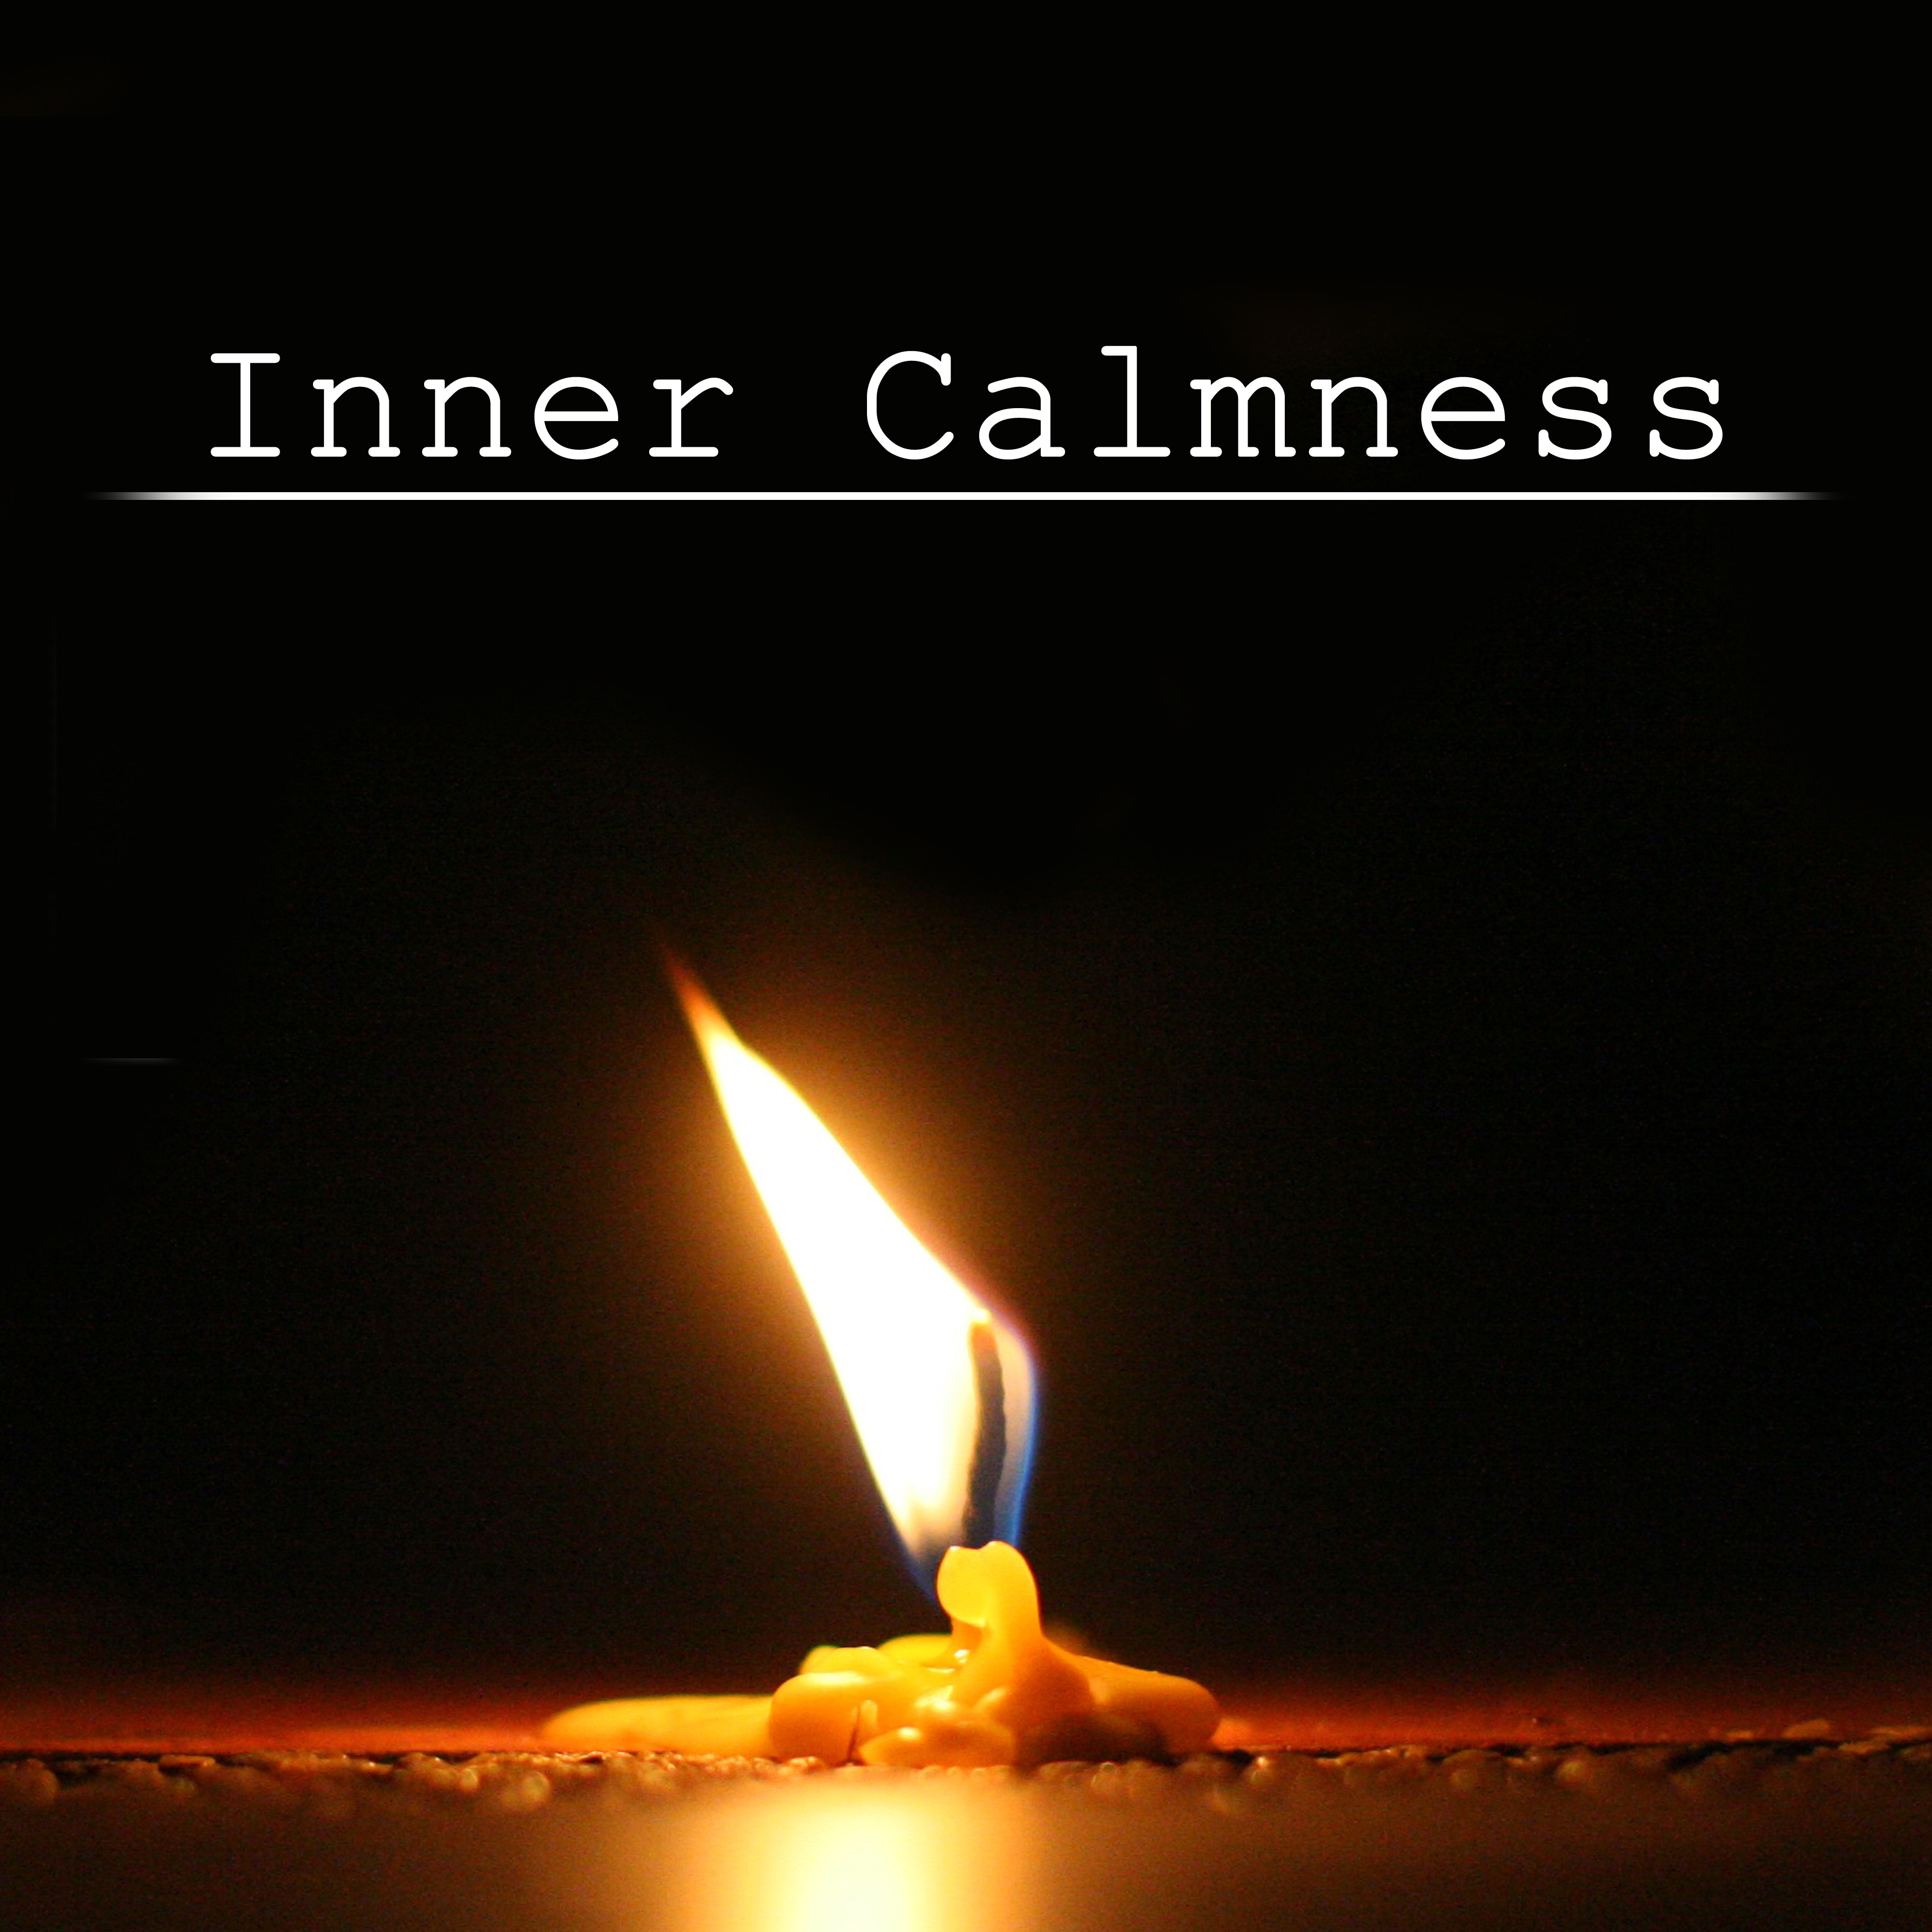 Inner Calmness – Easy Sleep Music, Bedtime, Soothing Nature Sounds for Relaxation, Pure Sleep, Therapy Sounds, Soft Lullabies, Music at Goodnight